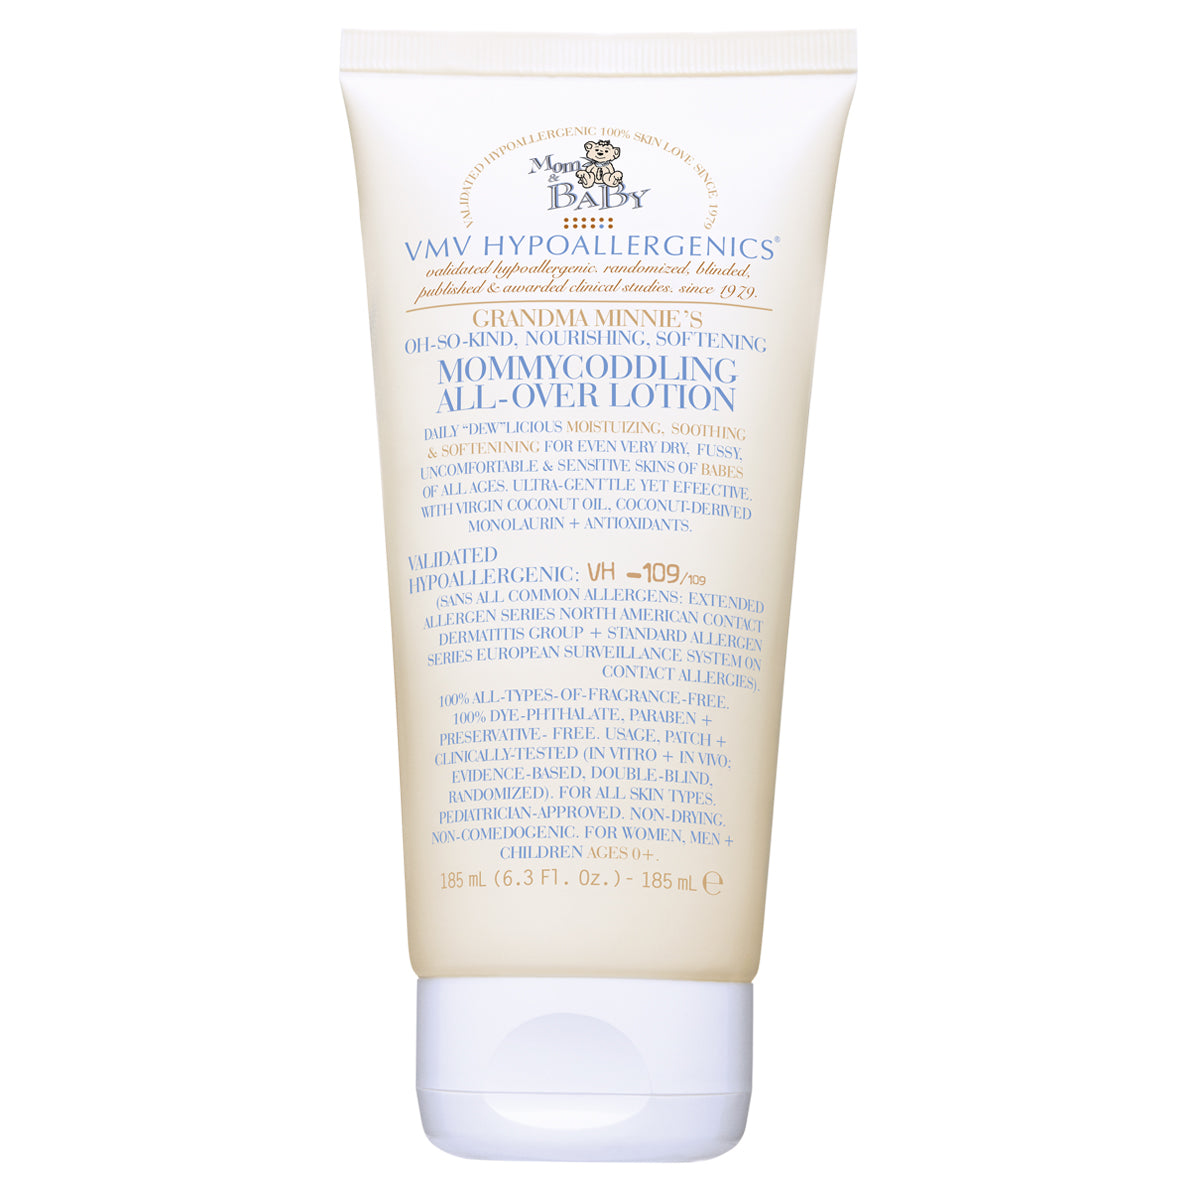 Grandma Minnie's Oh-So-Kind Nourishing, Softening Mommycoddling All-over Lotion 185ml